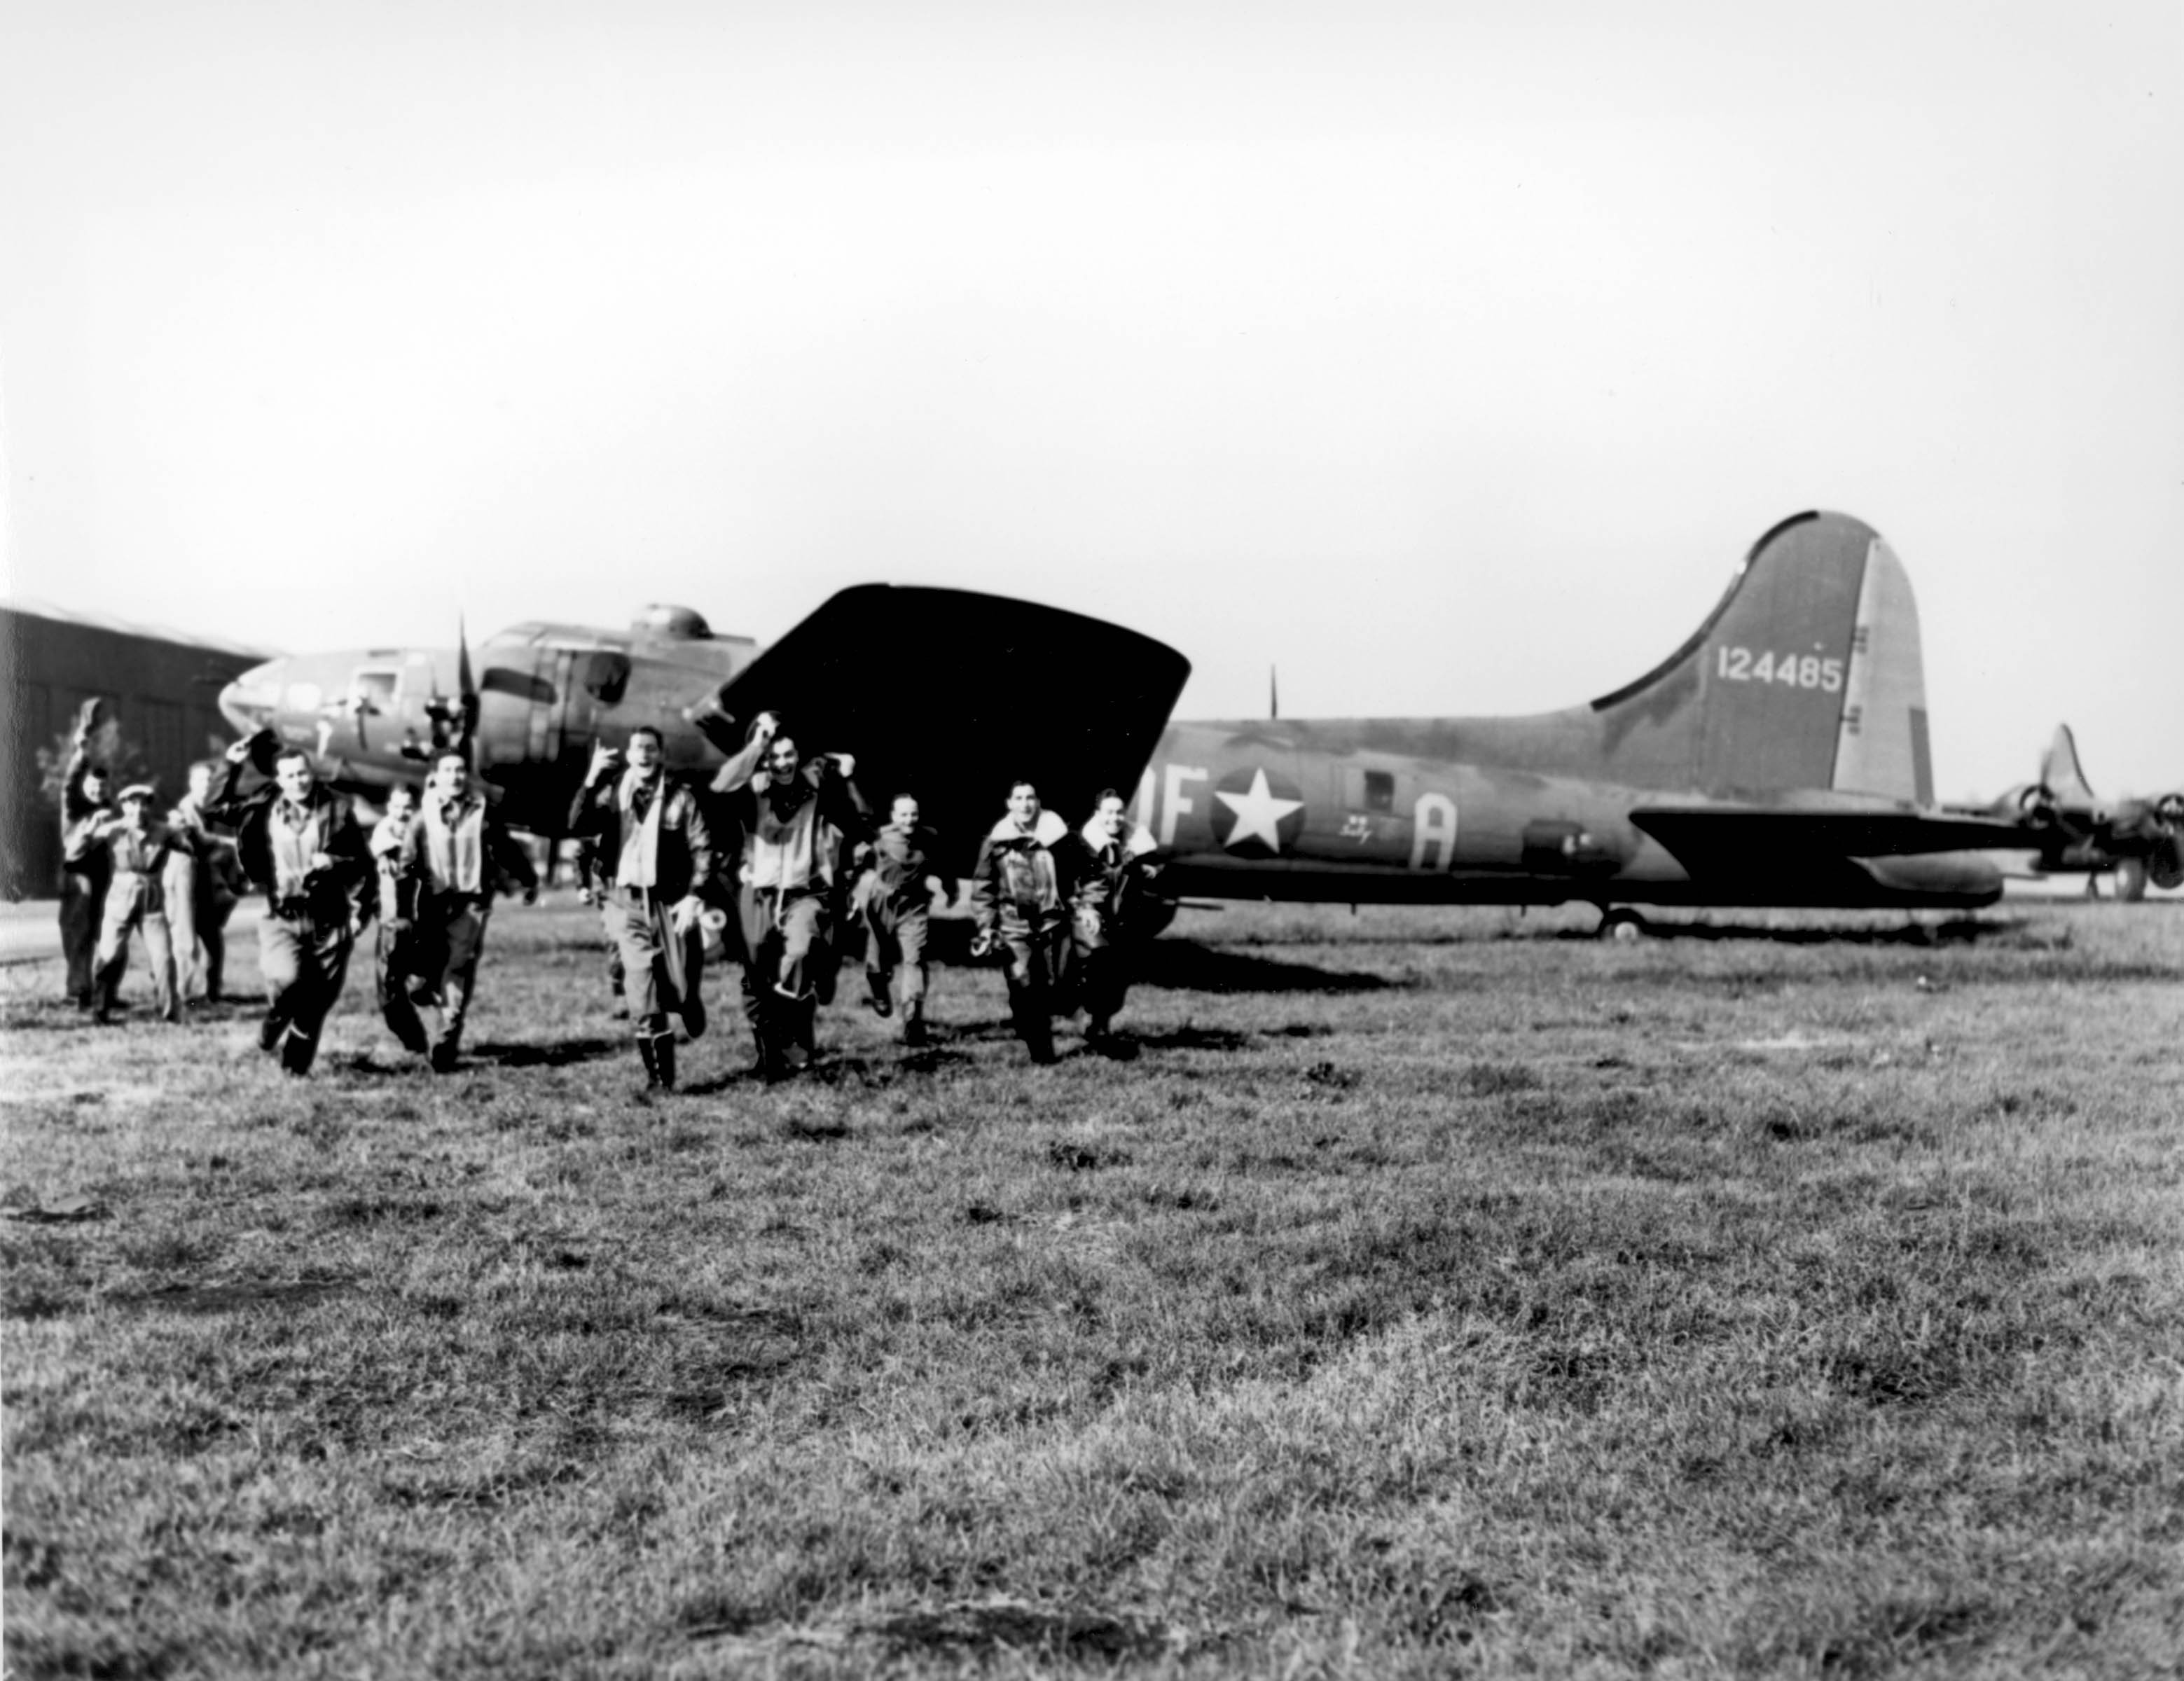 Survivors. The crew of the Memphis belle after their 25th combat mission, 17 May 1943. (U.S. Air Force)